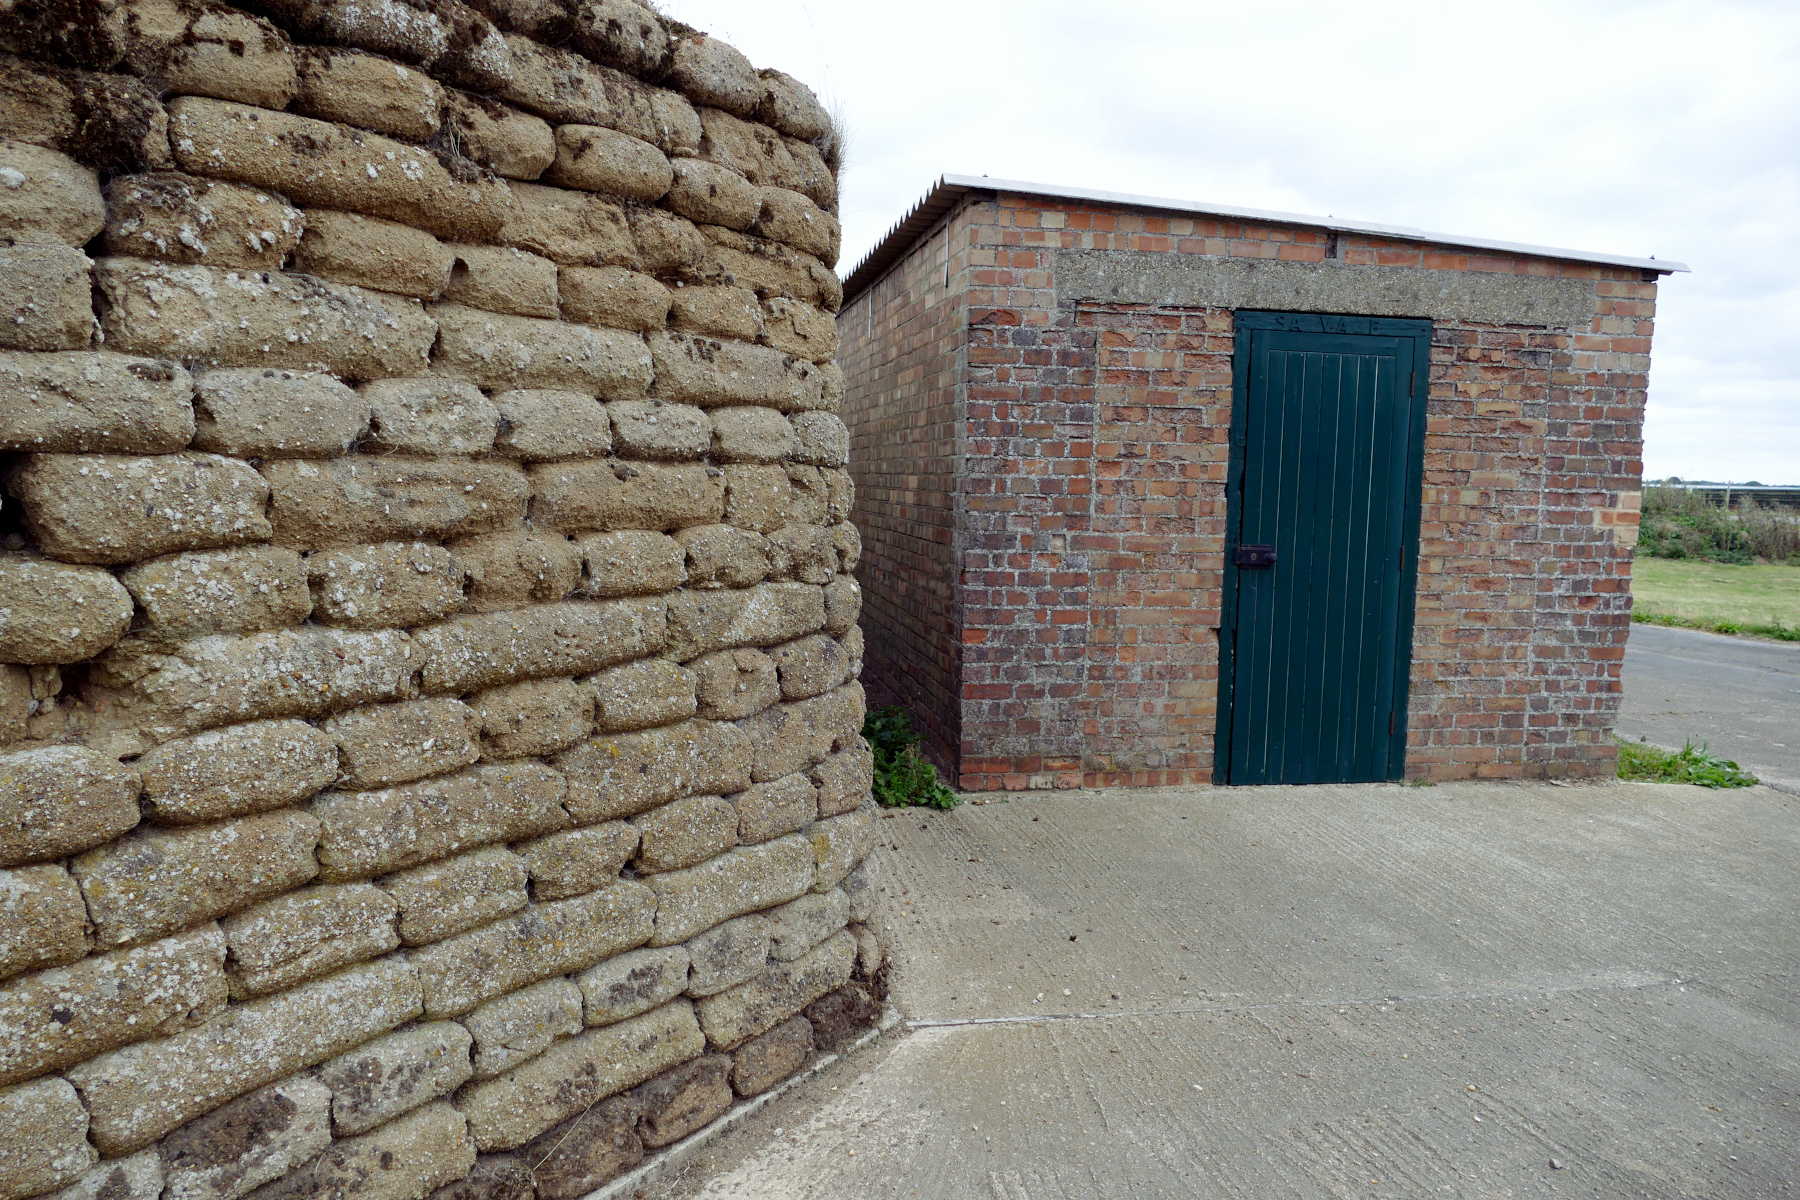 Close up of original WW2 fighter pen with concrete sandbank walls and brick shelter